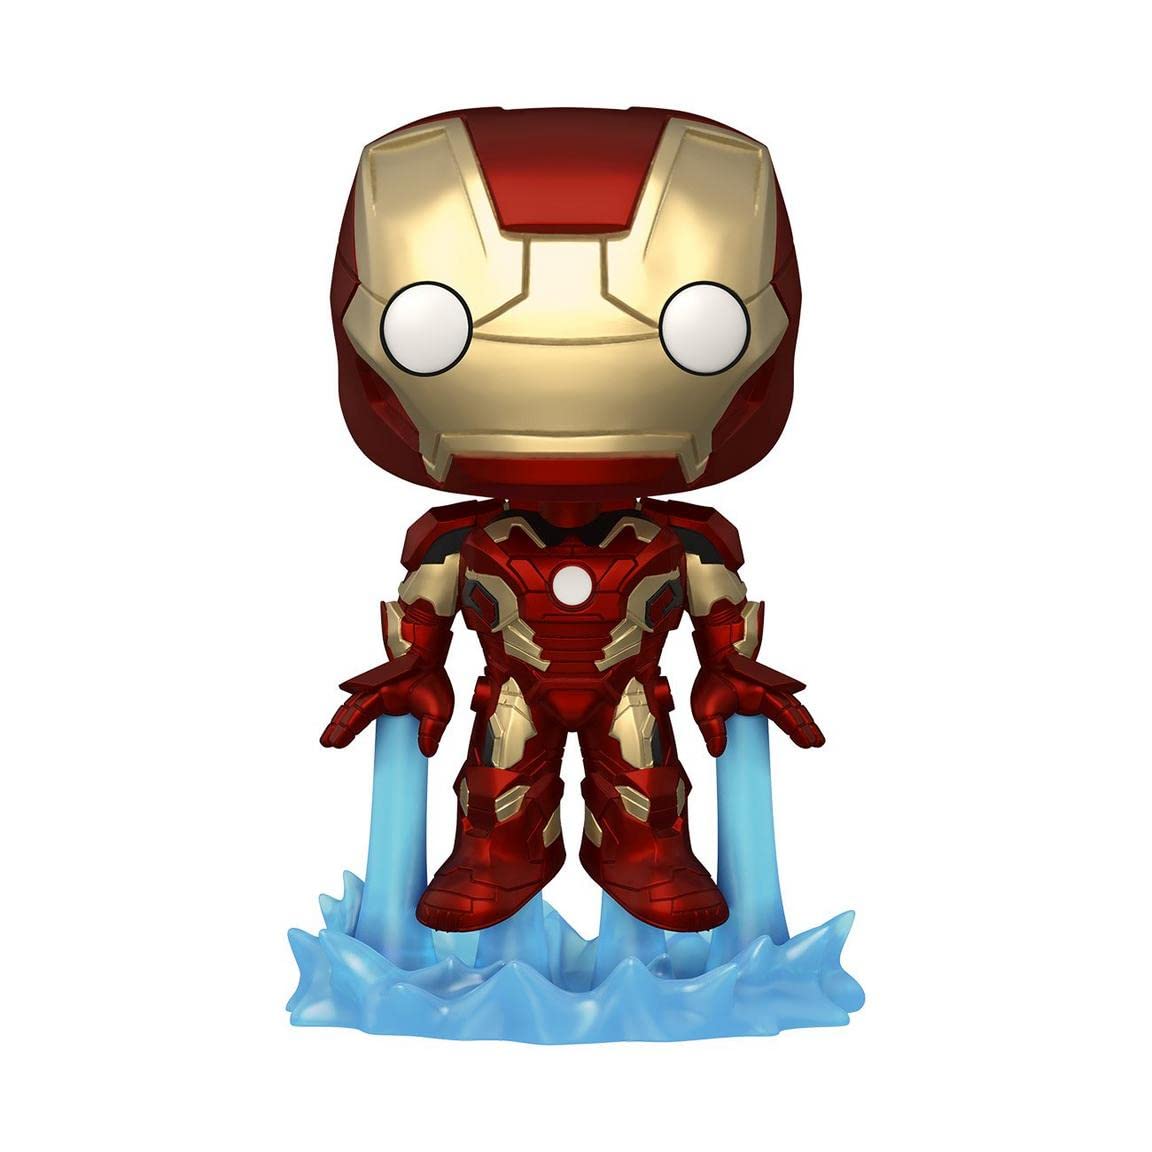 Funko POP! Avengers Age of Ultron 10 Inch Iron Man [Glows in The Dark] Exclusive